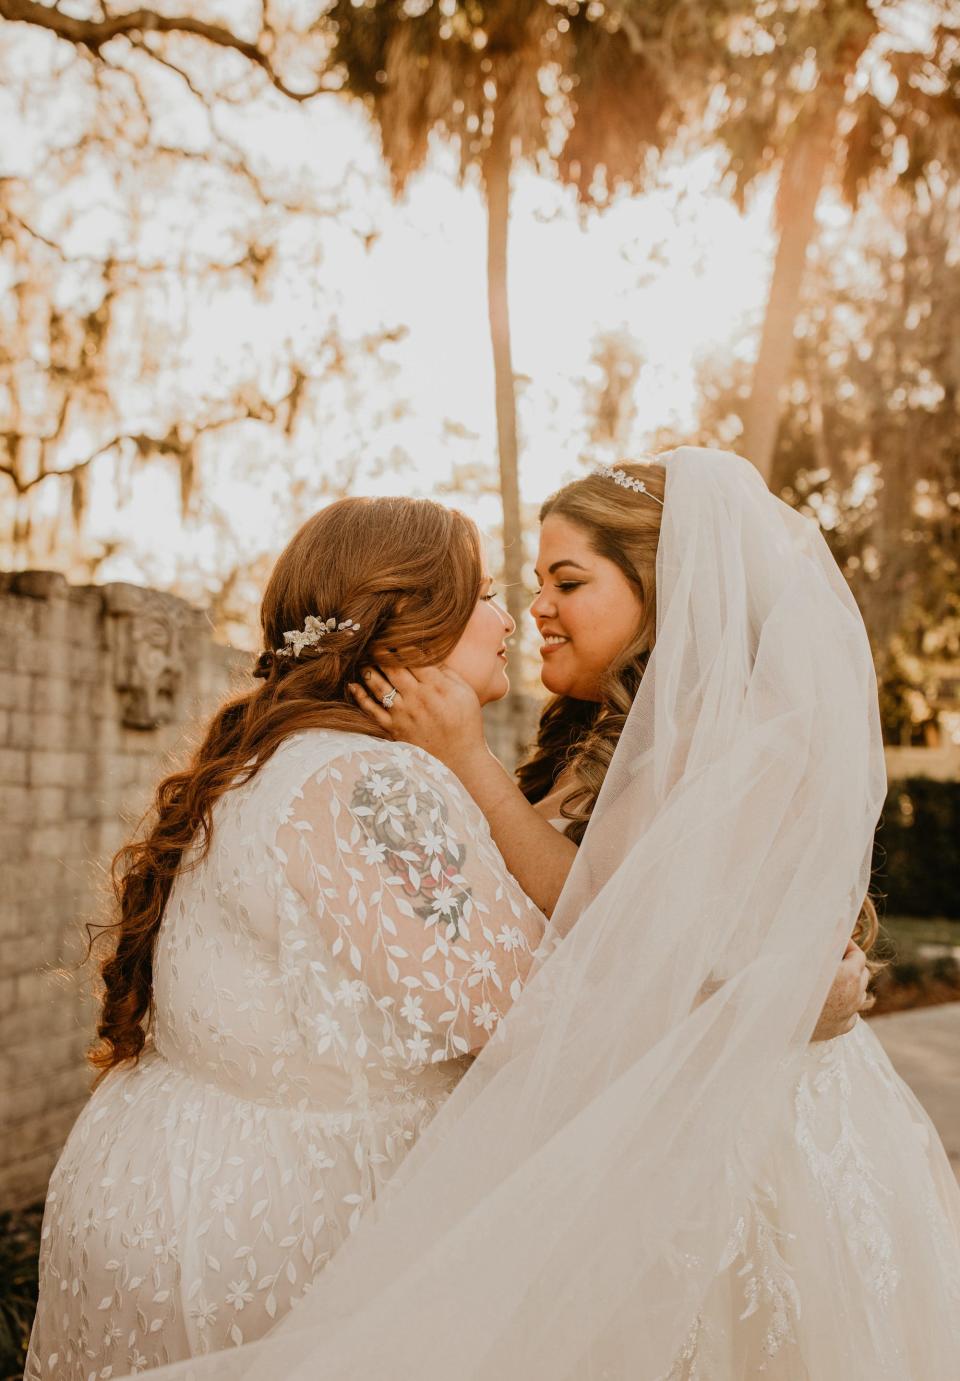 Two brides hold each other and gaze in each other's eyes.